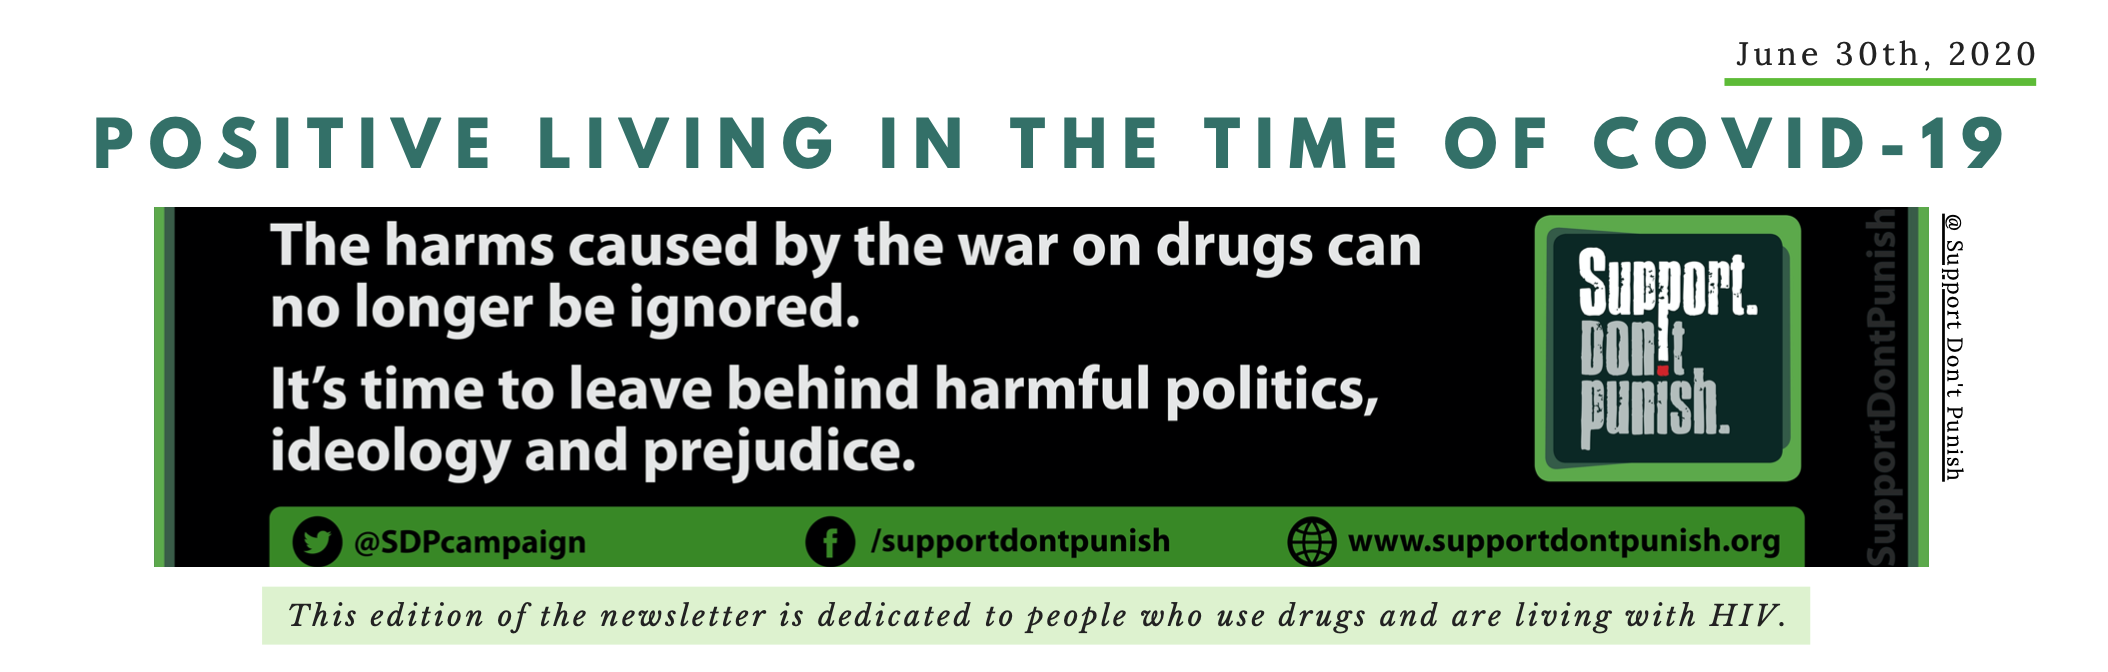 7th edition – people who use drugs and are living with HIV